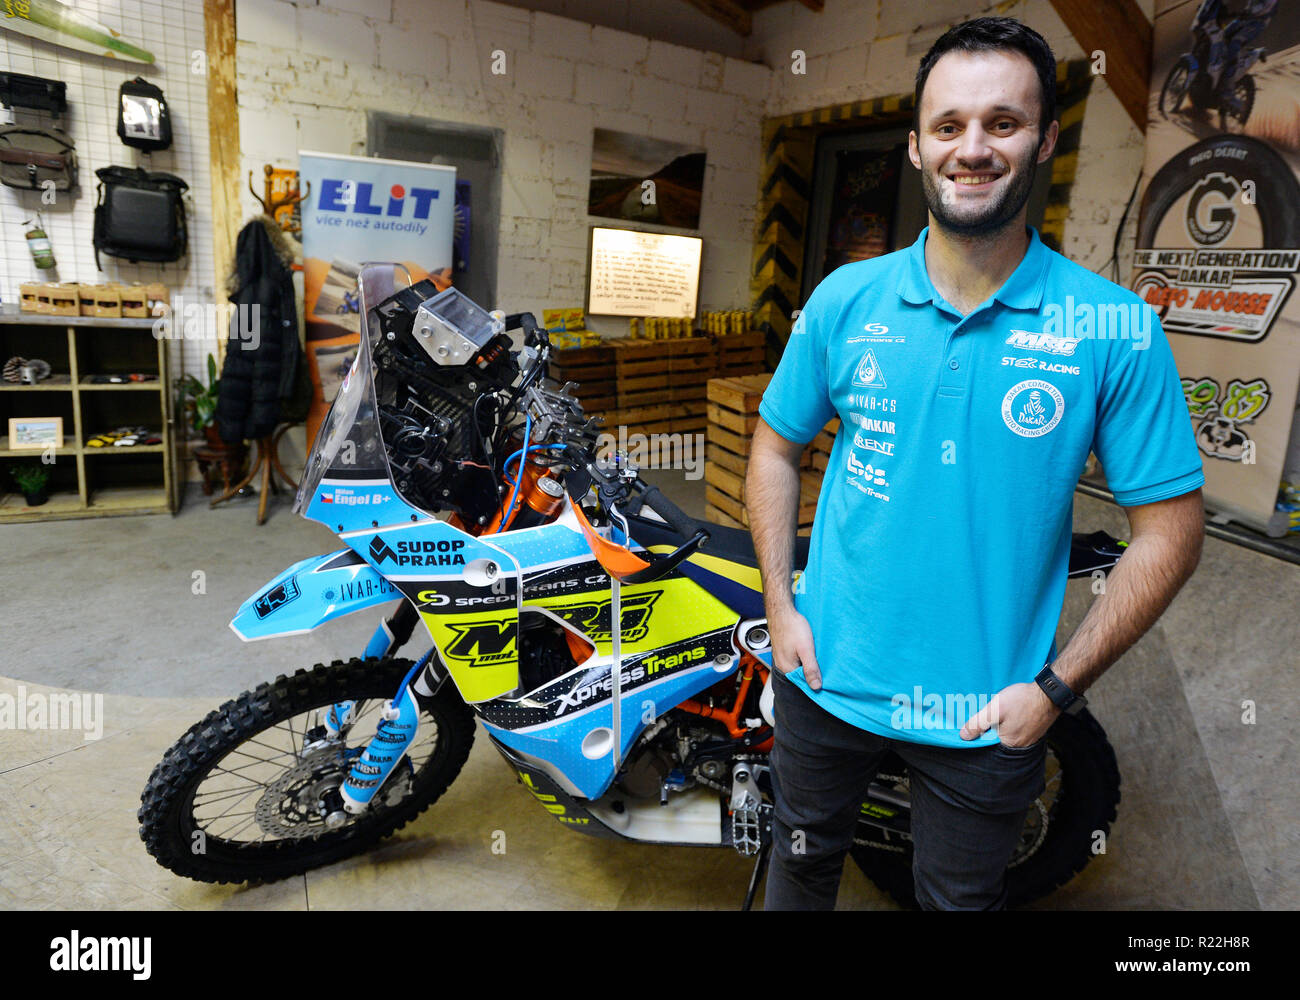 Motorcycle Dakar Rally High Resolution Stock Photography and Images - Alamy